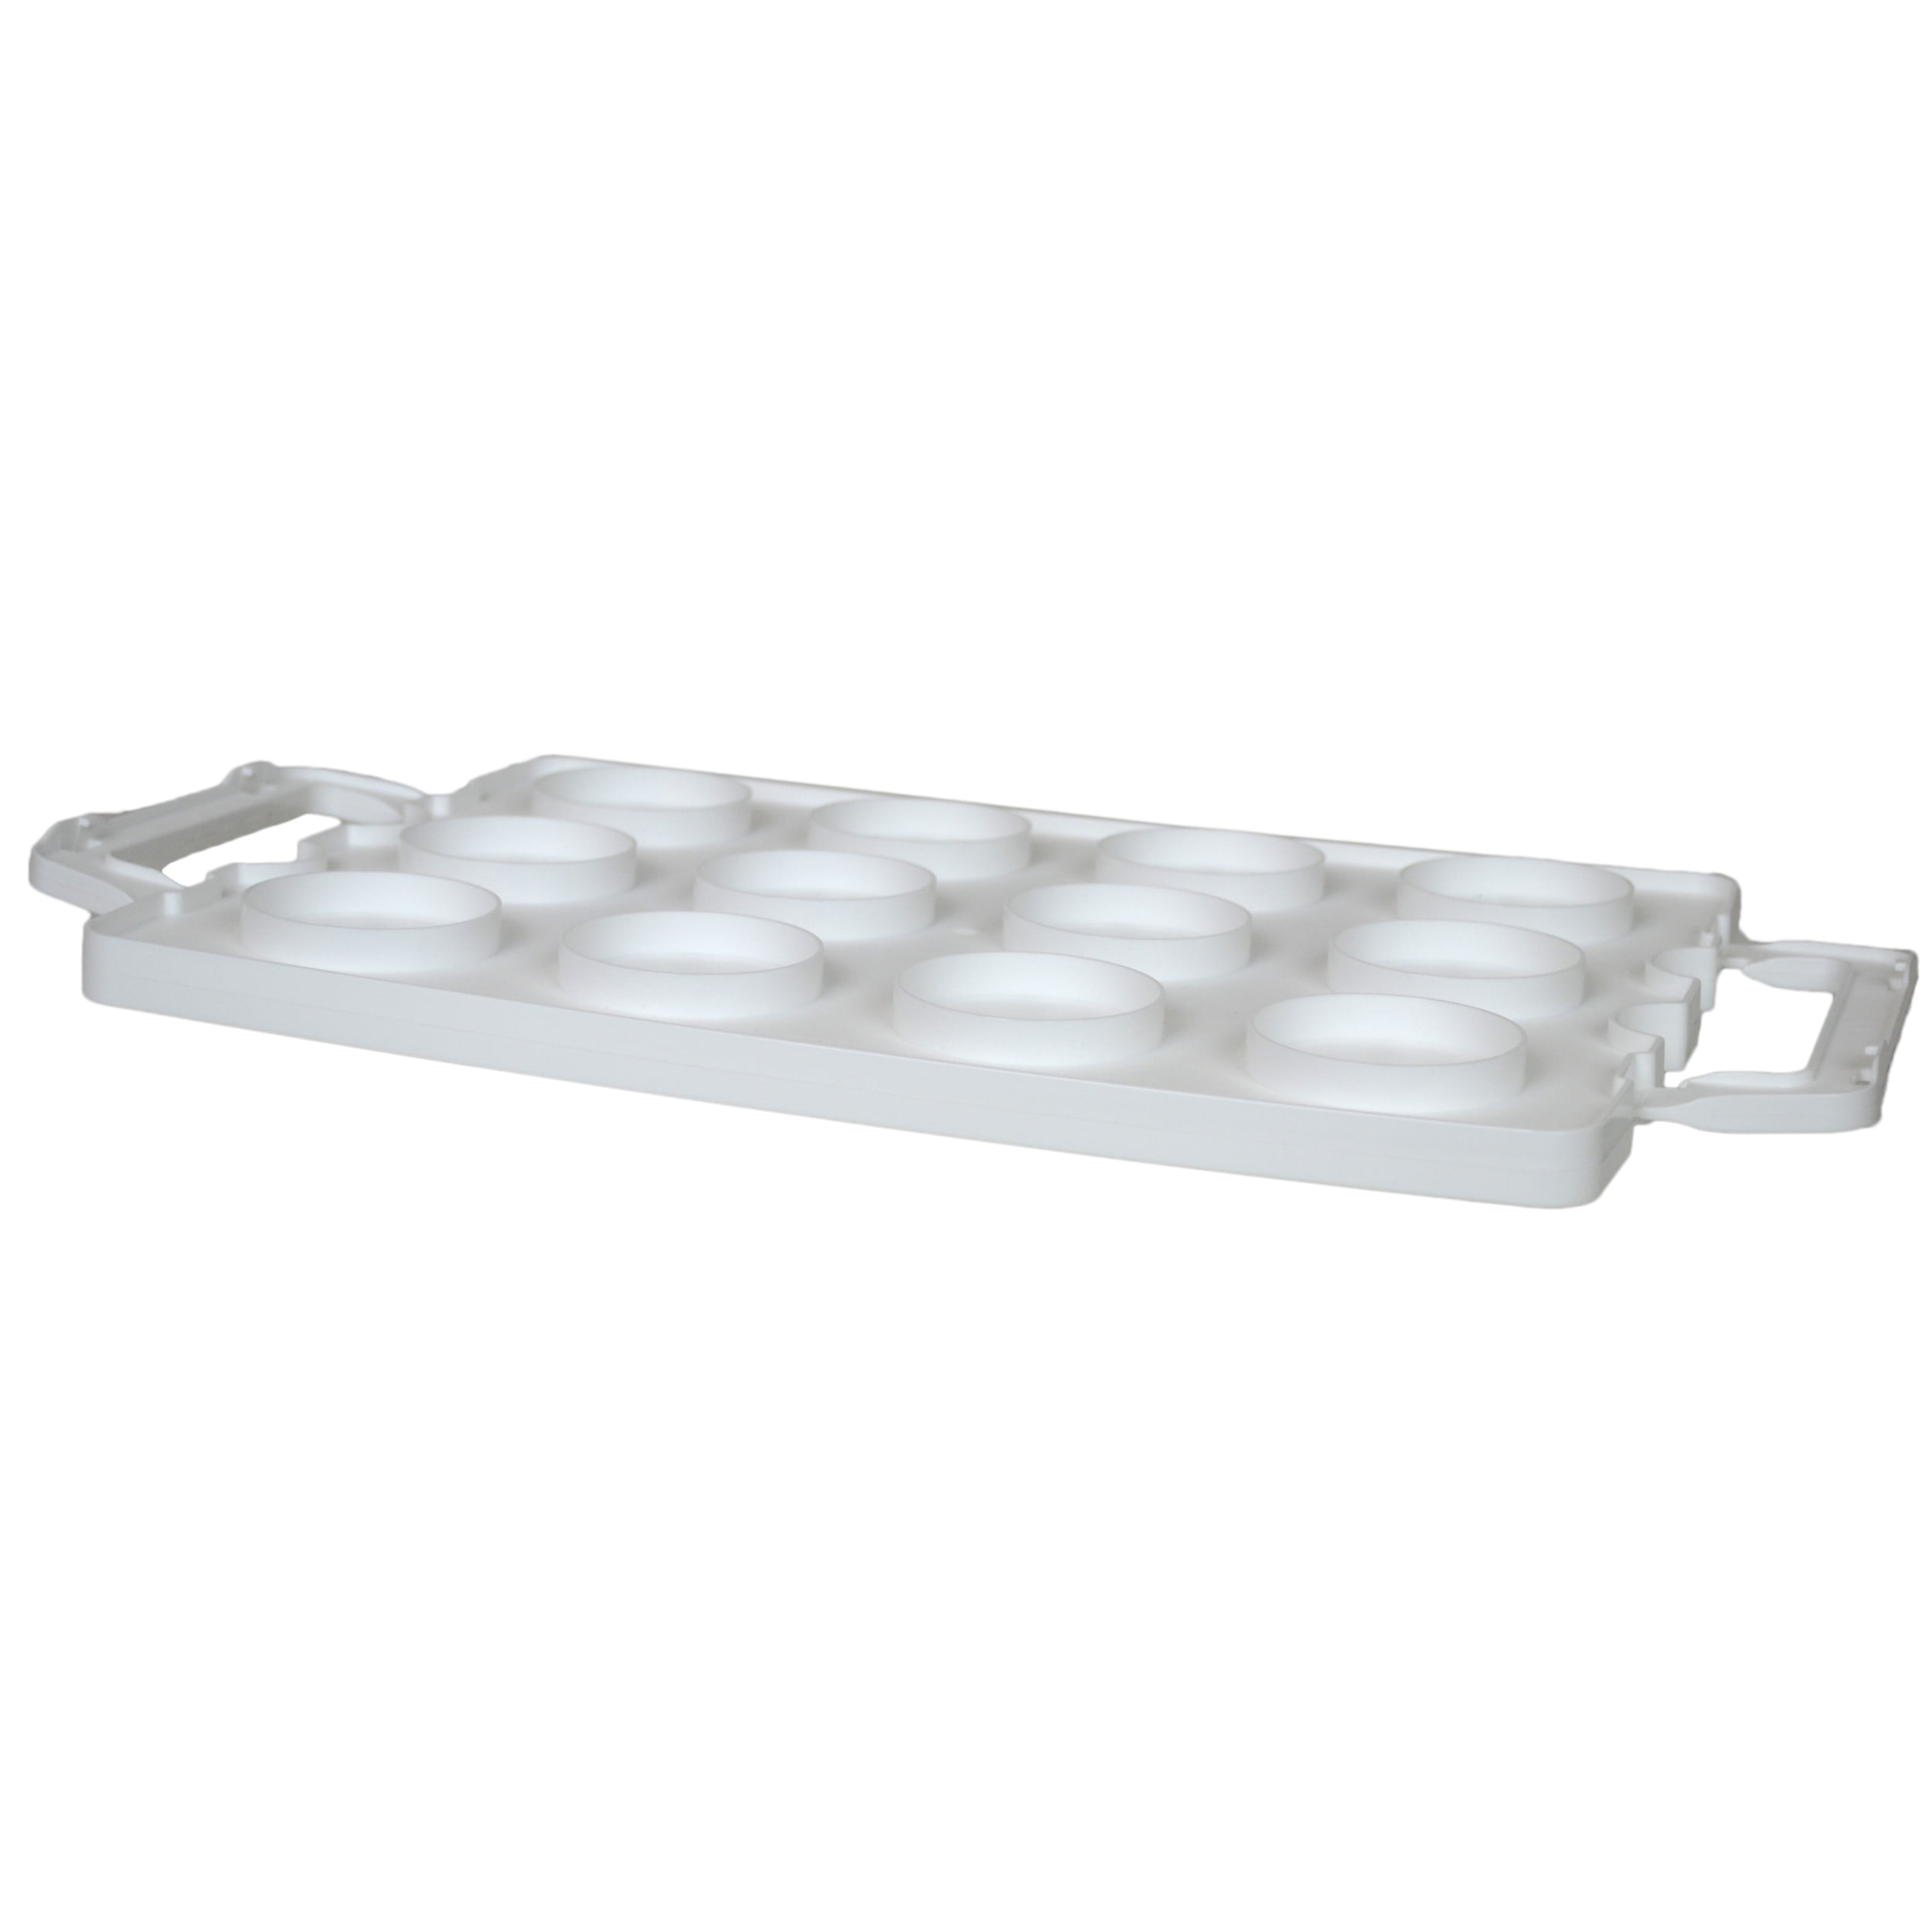 Snapware Enter-Tainers Egg Carrier - Clear, 2 pk - Kroger